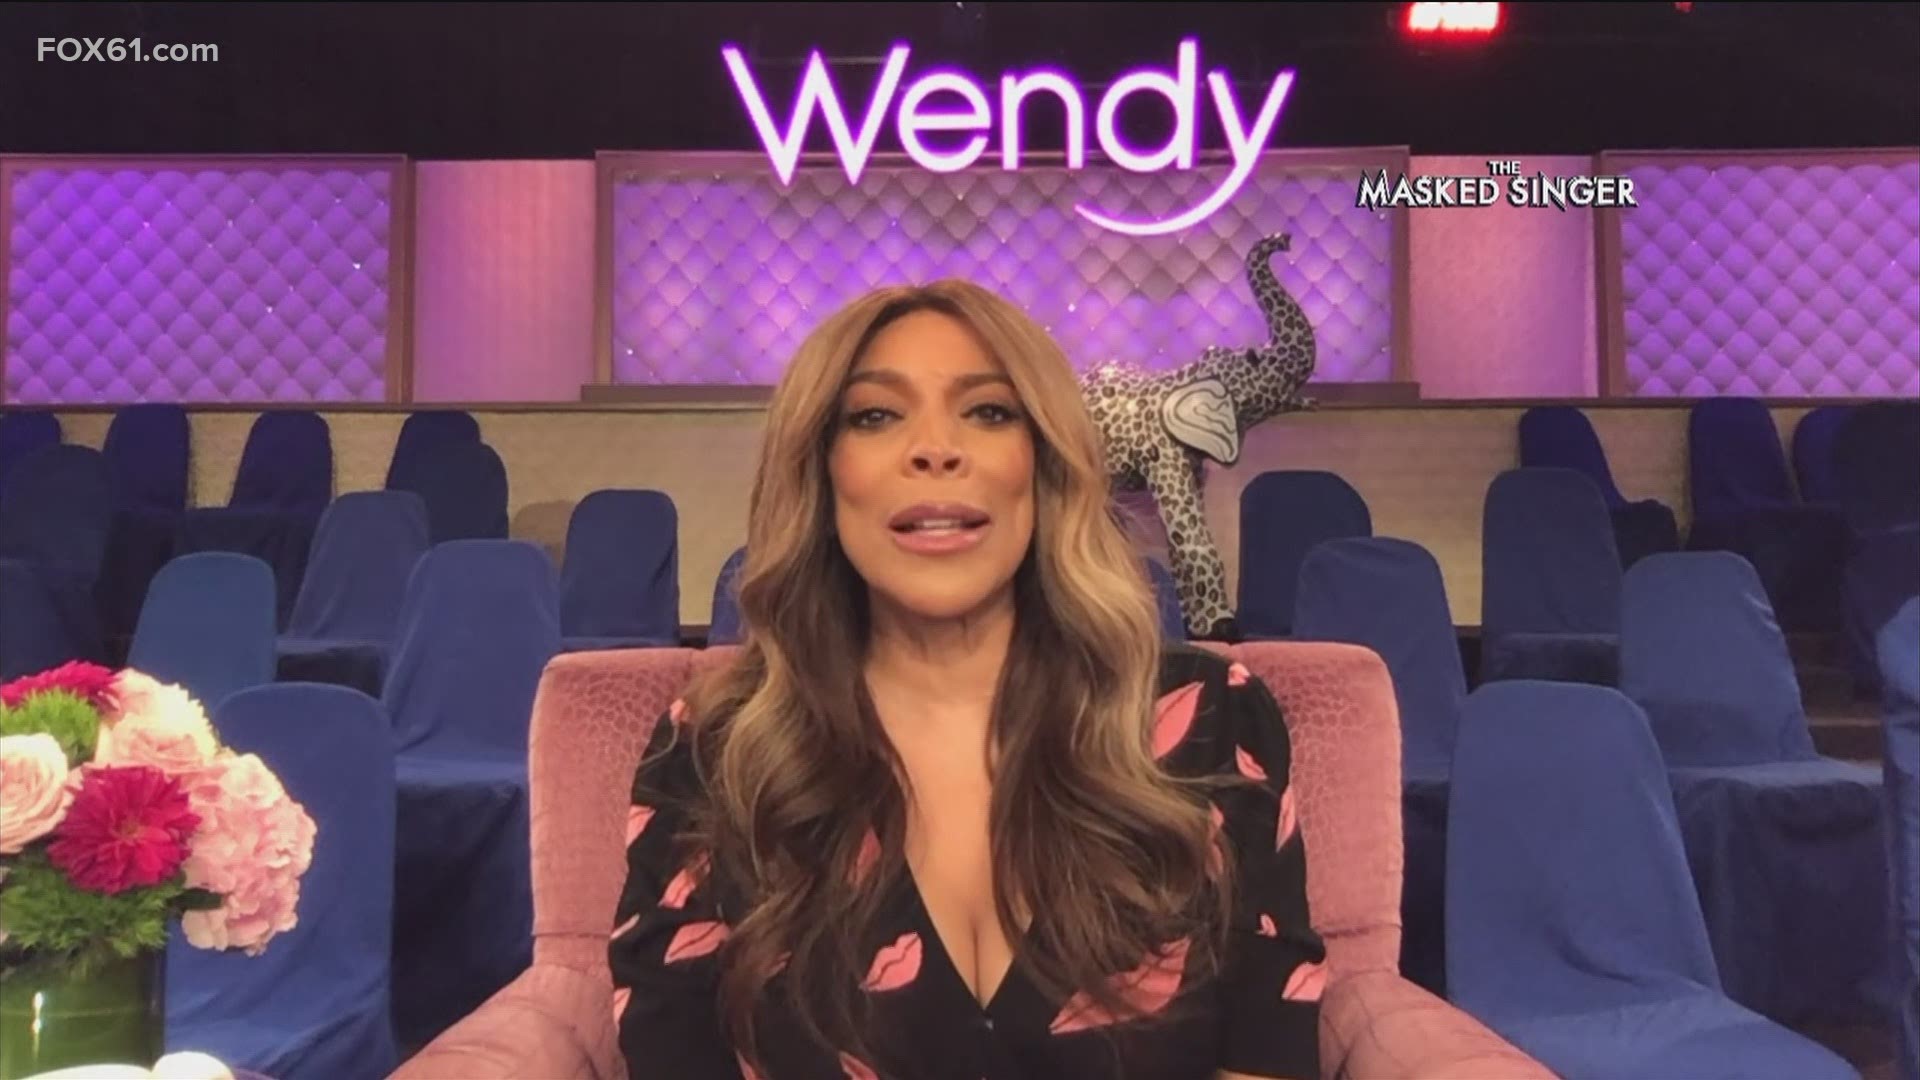 Talk-show host, Wendy Williams joined the FOX61 Morning News Friday to discuss what it was like to compete on The Masked Singer!